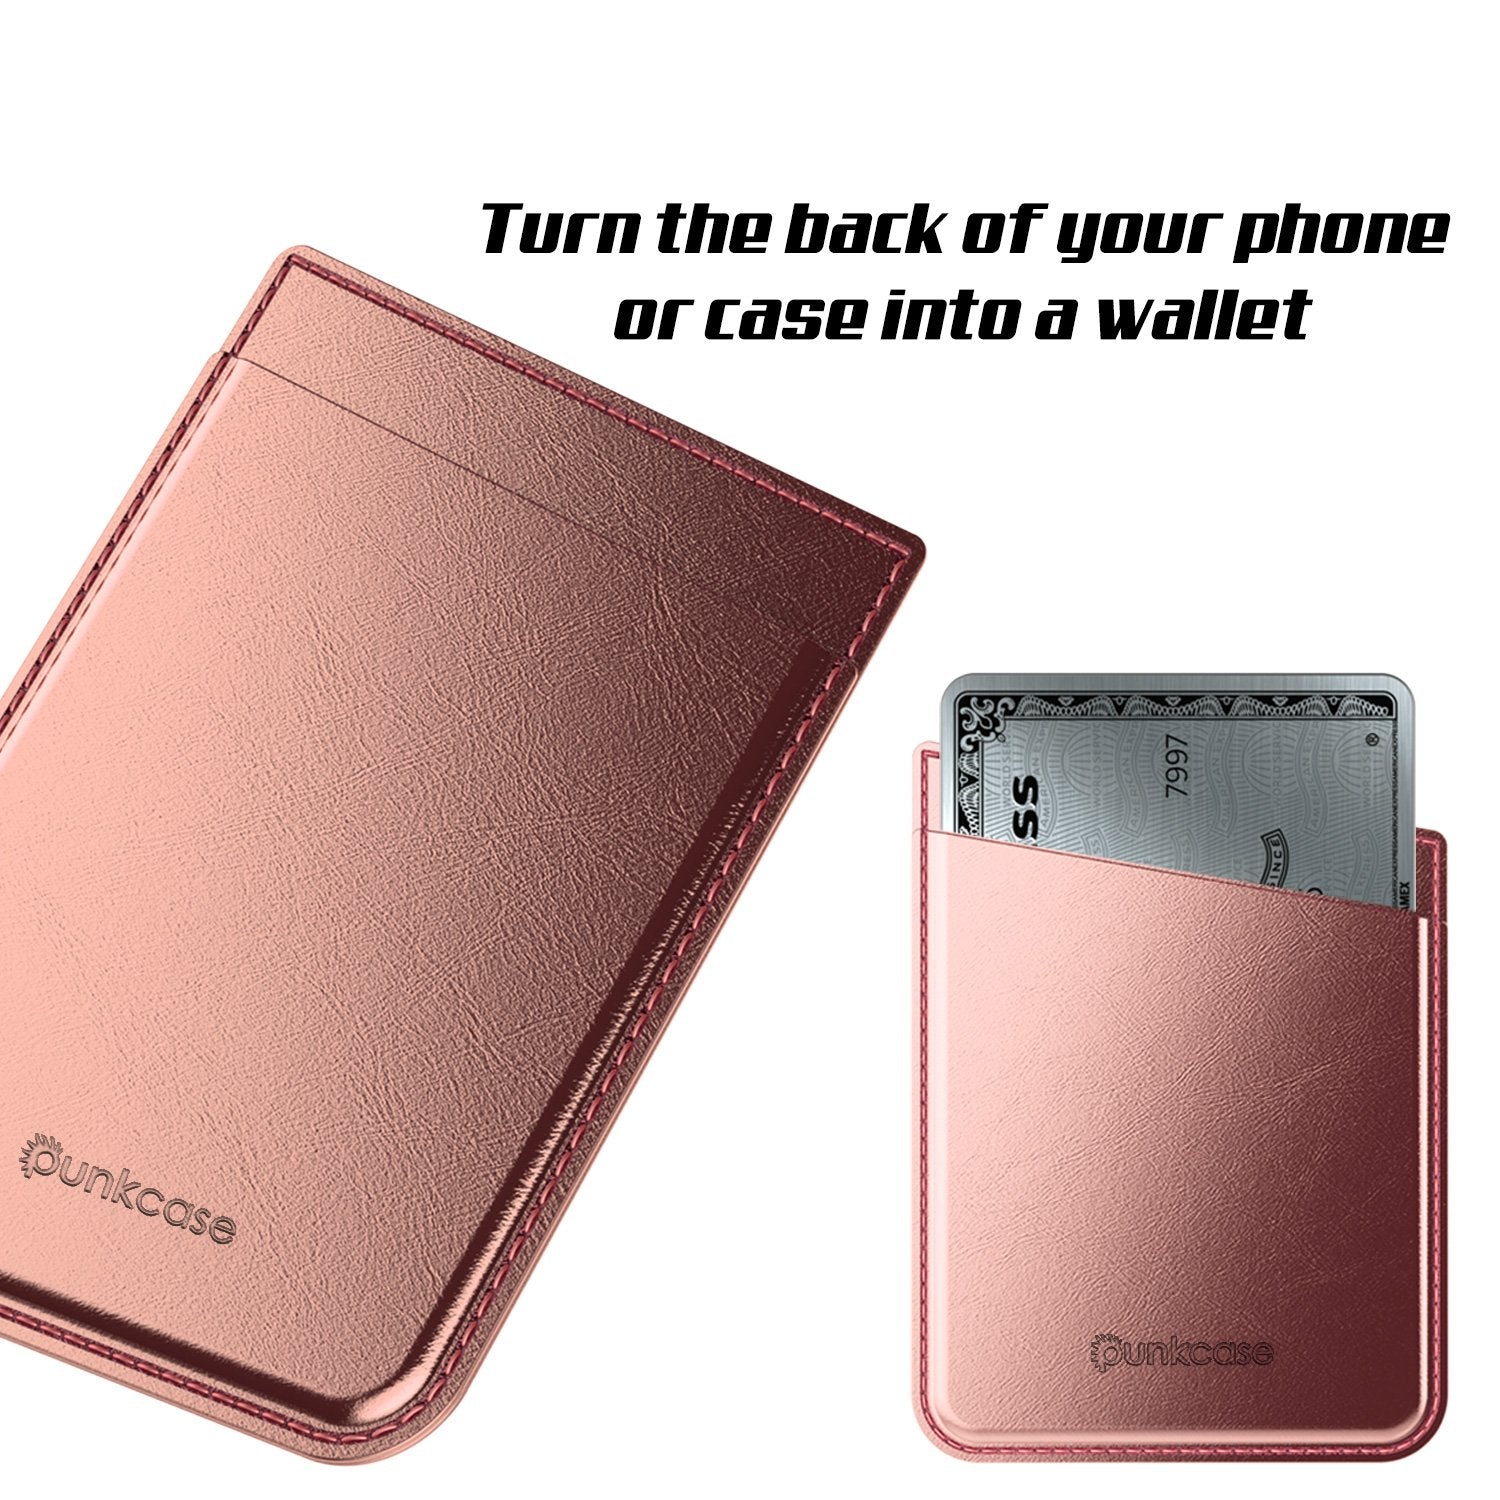 PunkCase CardStud Deluxe Stick On Wallet | Adhesive Card Holder Attachment for Back of iPhone, Android & More | Leather Pouch | [RoseGold] - PunkCase NZ